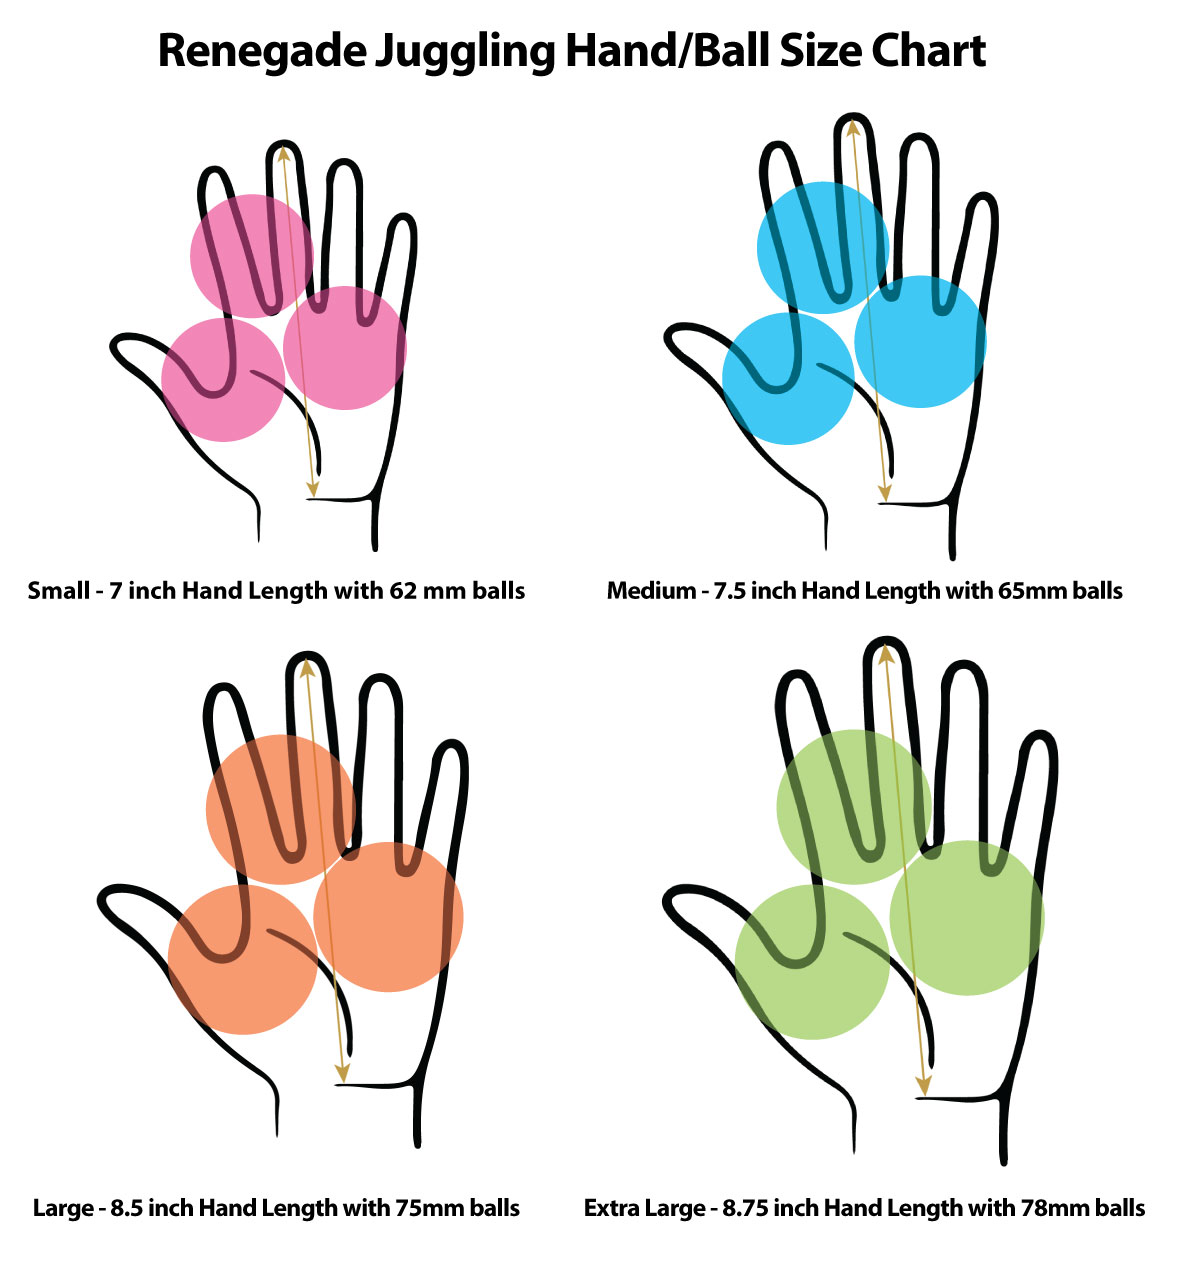 ball sizes for juggling